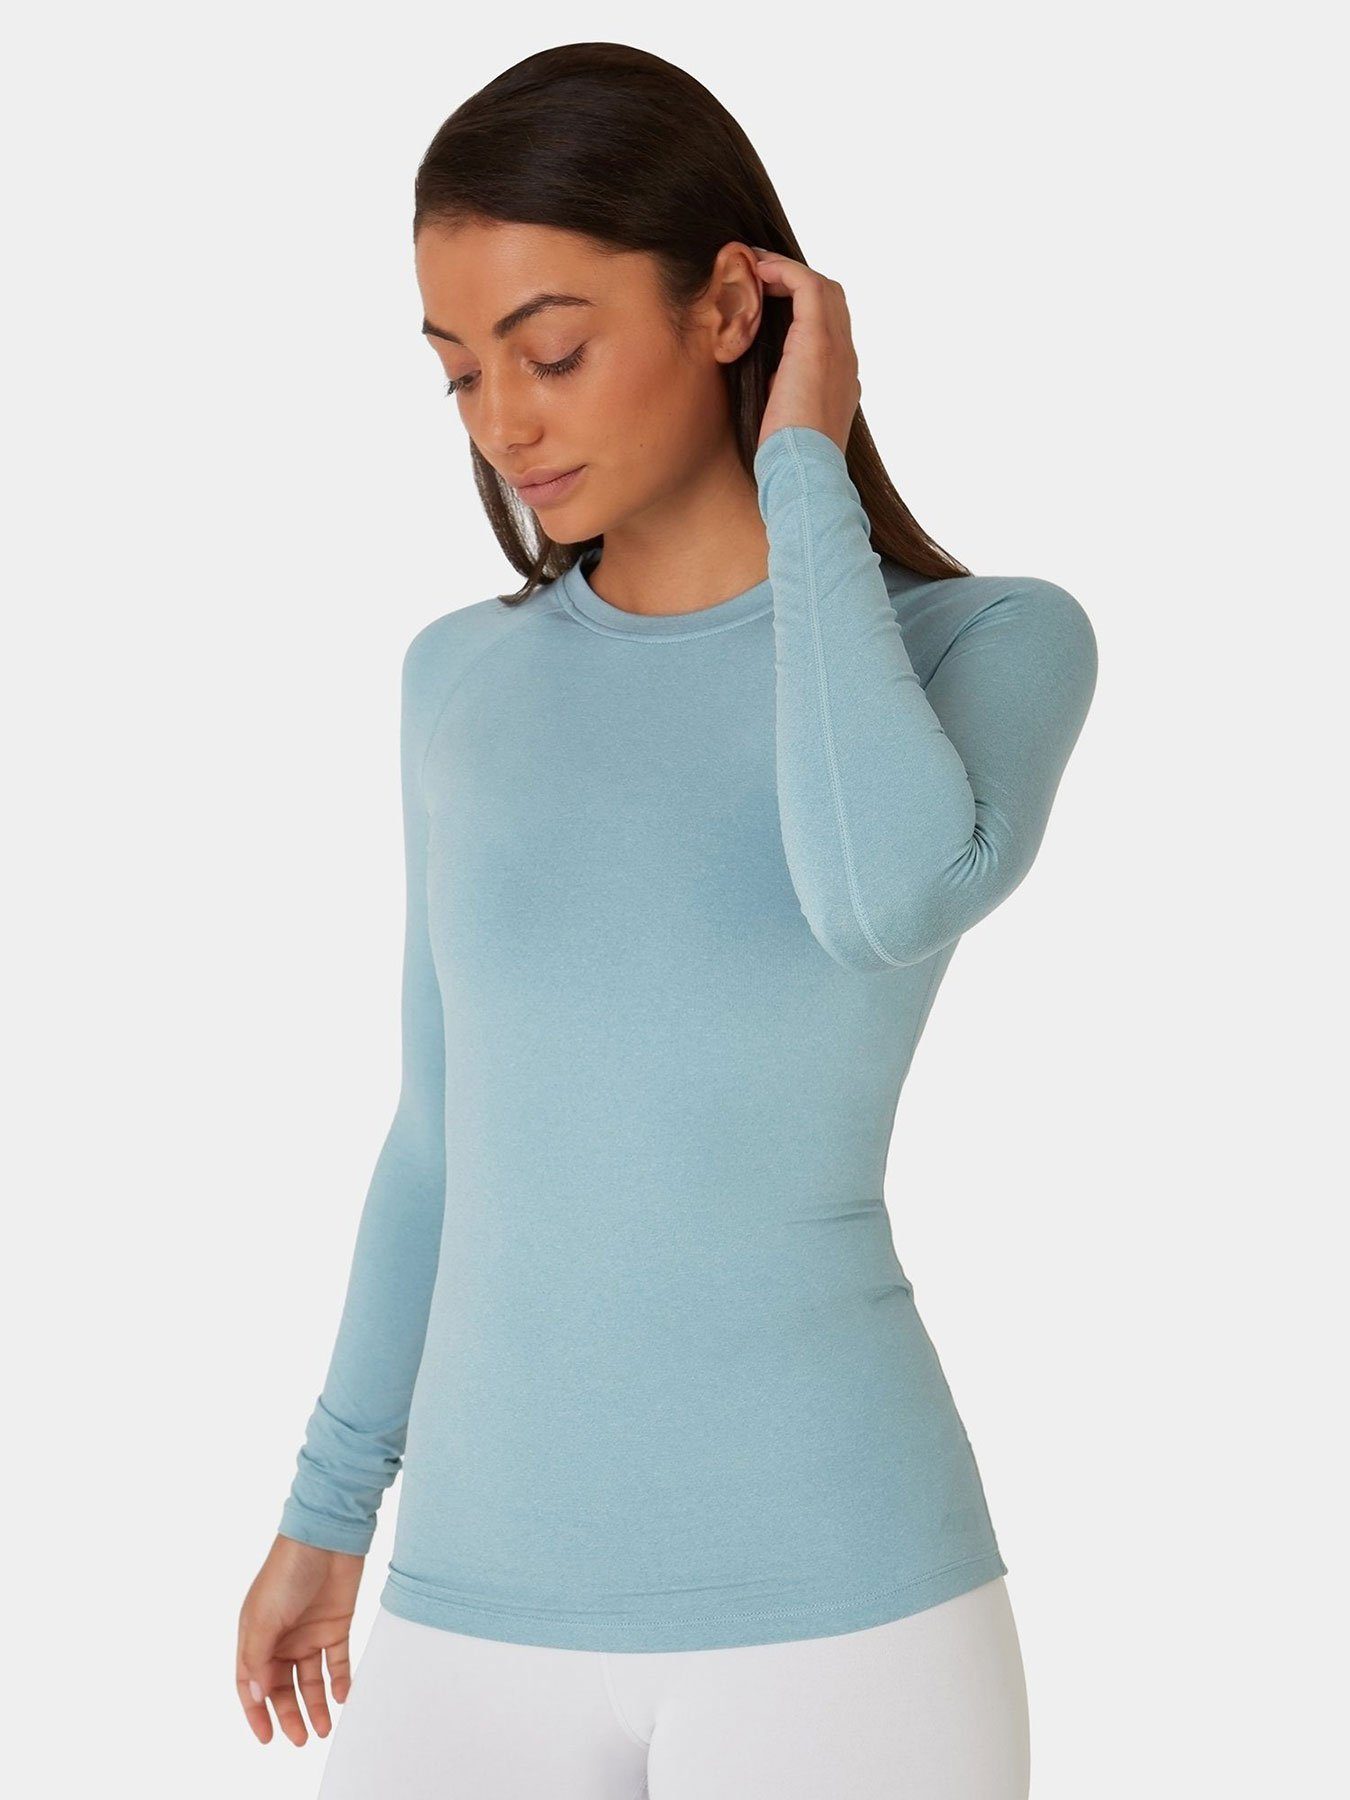 Best Deal for COOTRY 3/4 Sleeve Yoga Tops for Women Loose Fit Tee